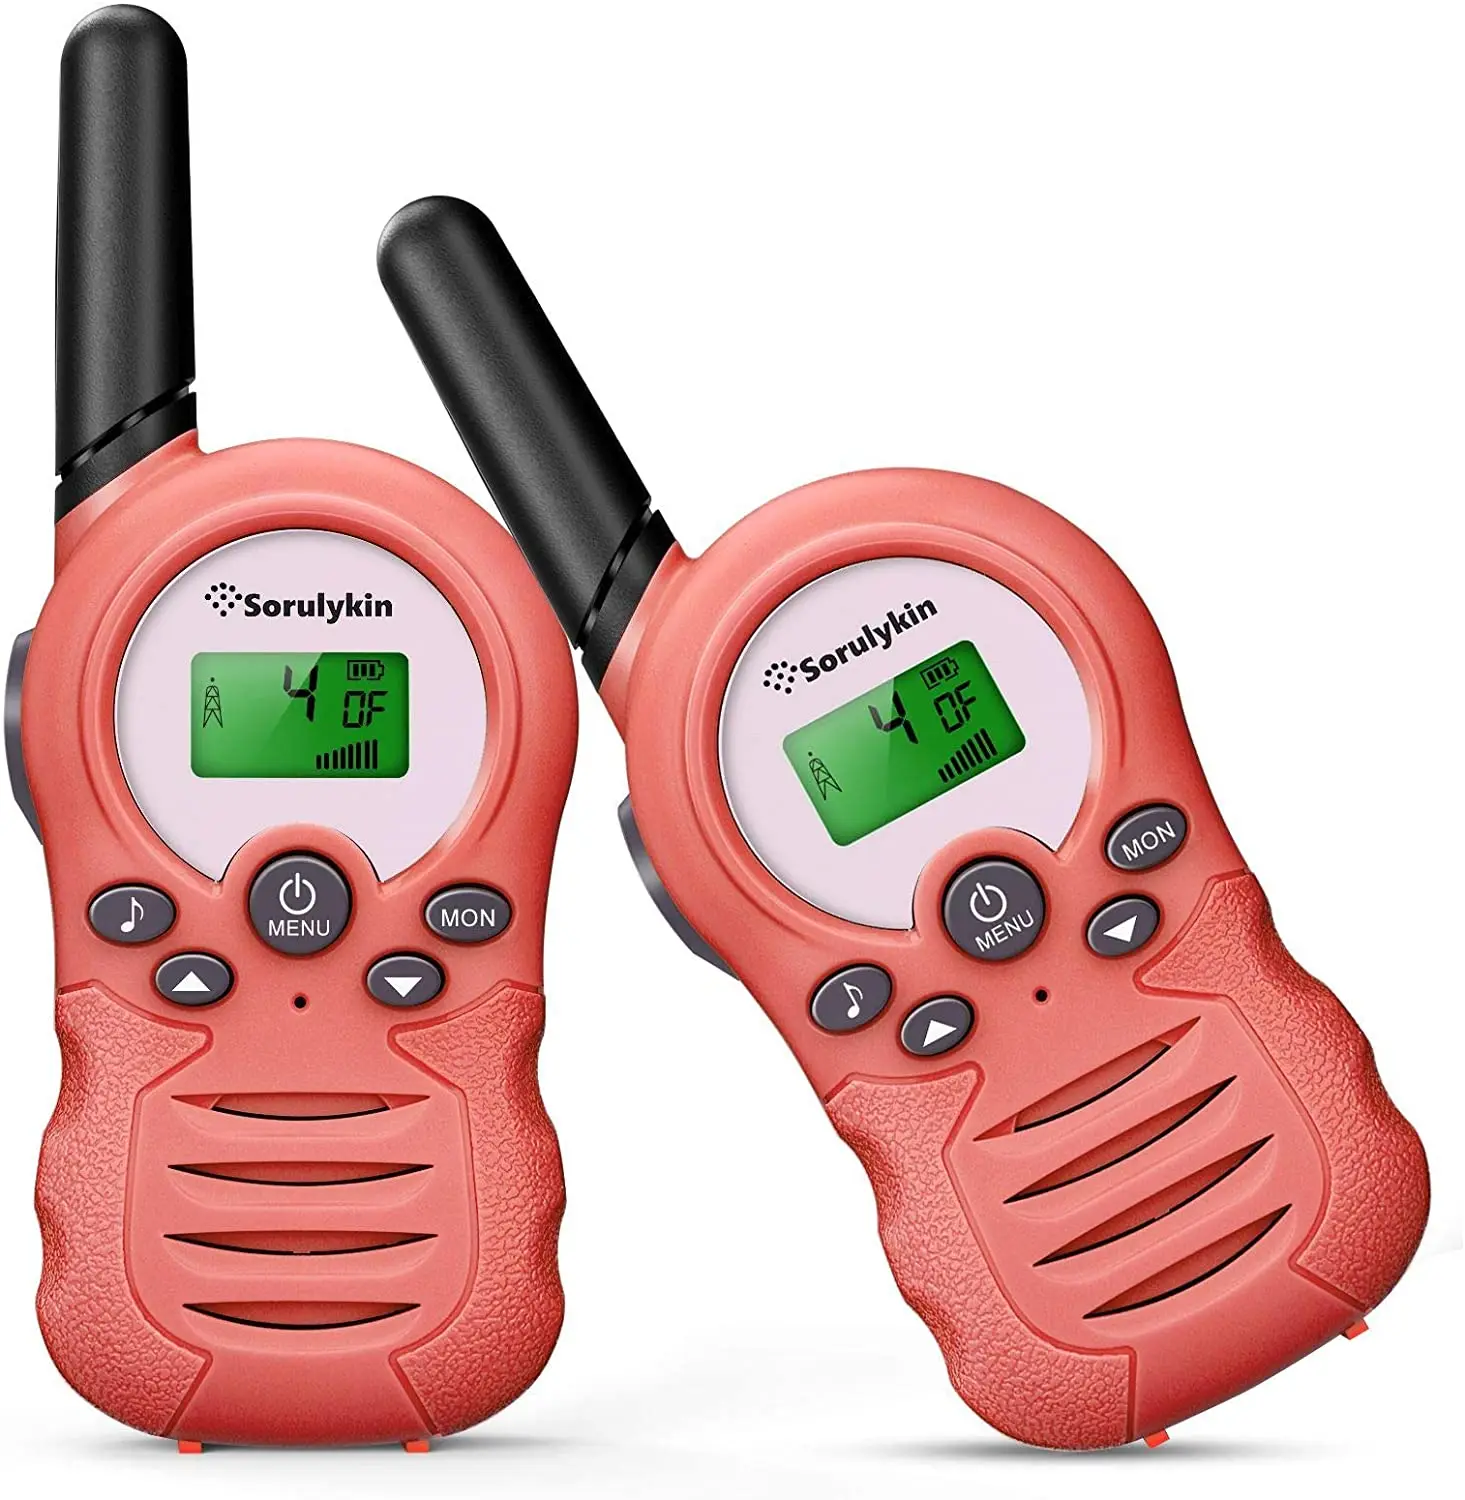 ahtandy Walkie Talkies Gift for Kids 22 Channel 2 Way Radio 3 Mile Long Range Use It to Prevent Childrens Myopia and Away from Electronic Games Best Birthday Gifts & Top Toys for Boy & Girls 